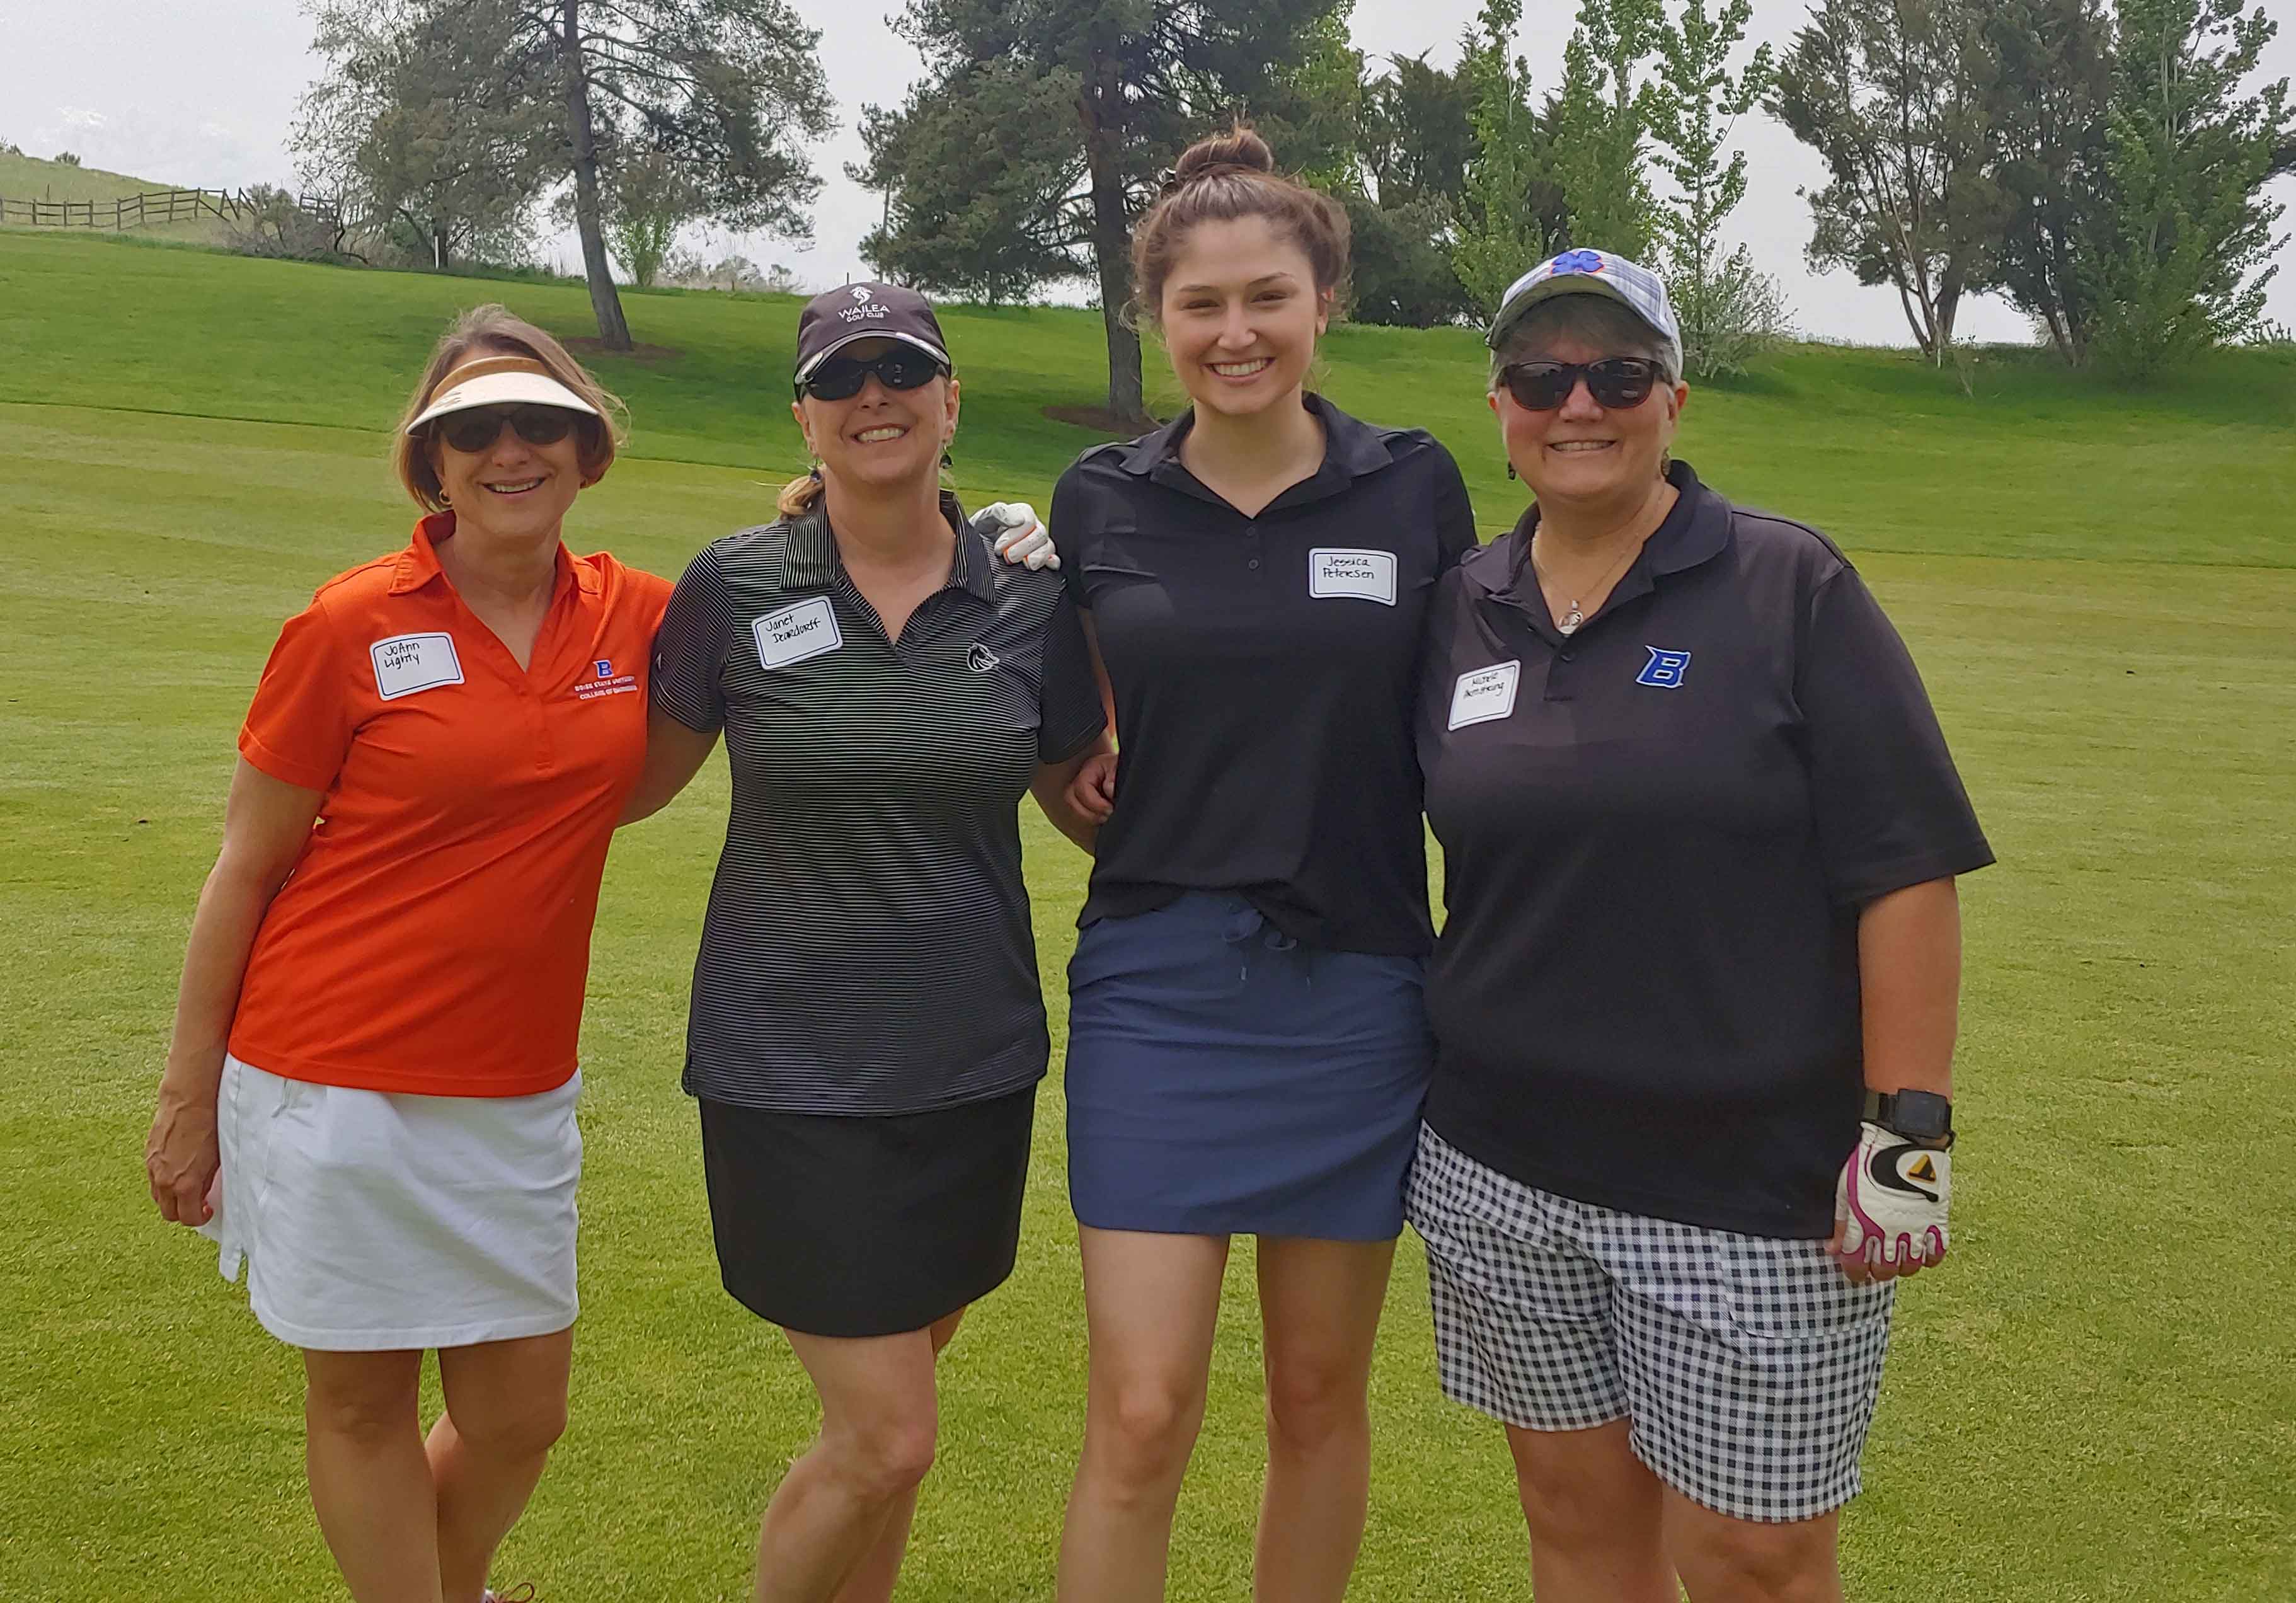 Boise state female golfers at tournament